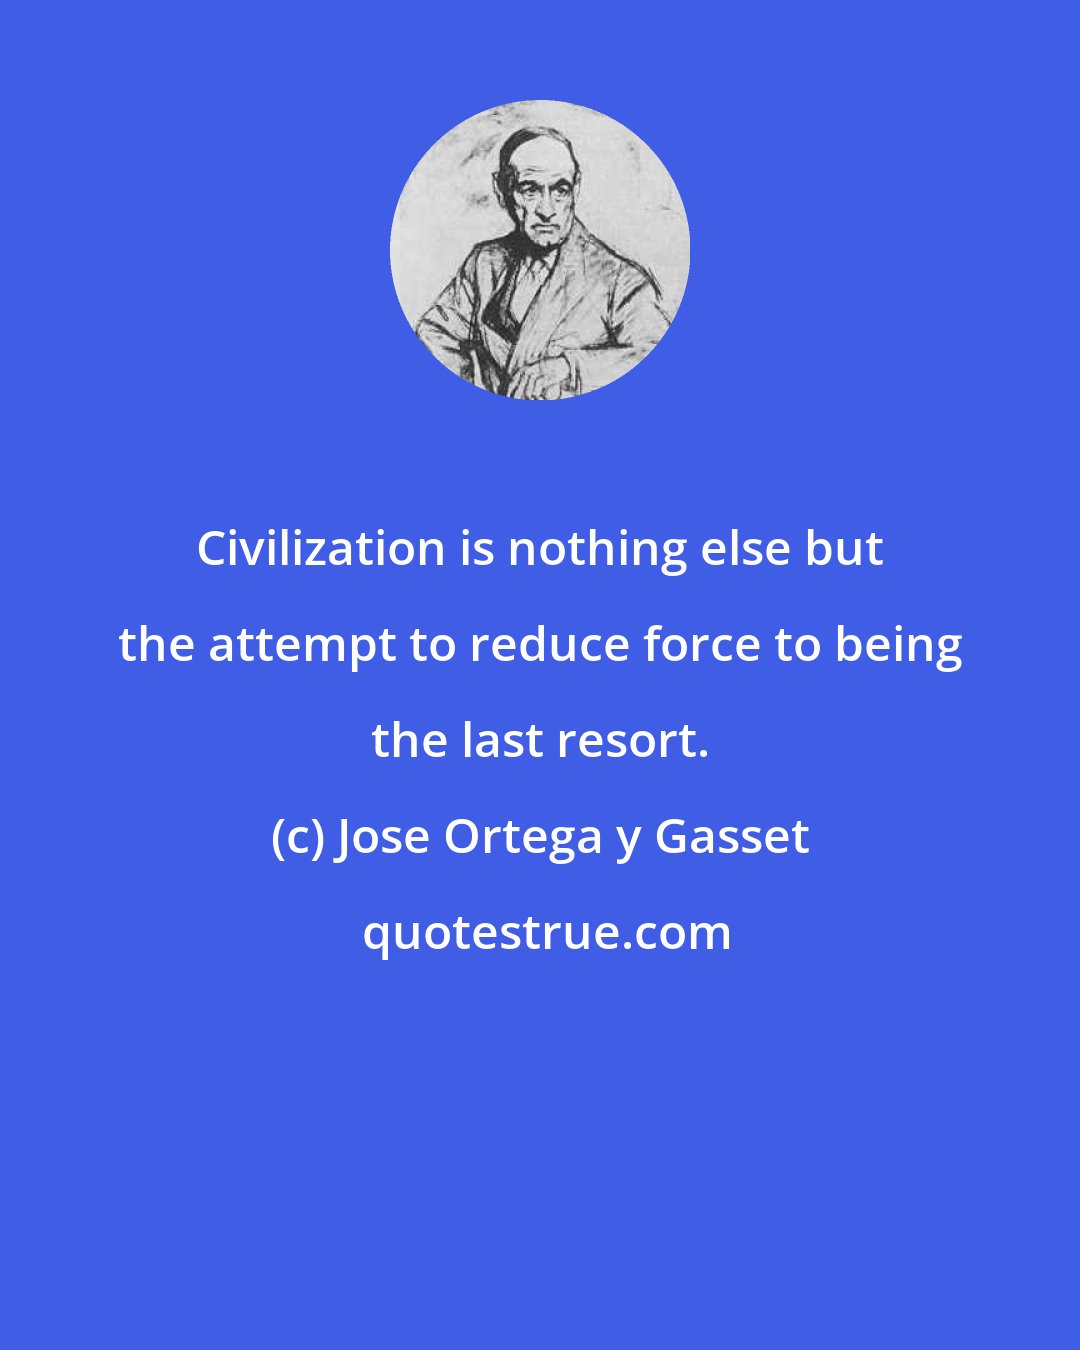 Jose Ortega y Gasset: Civilization is nothing else but the attempt to reduce force to being the last resort.